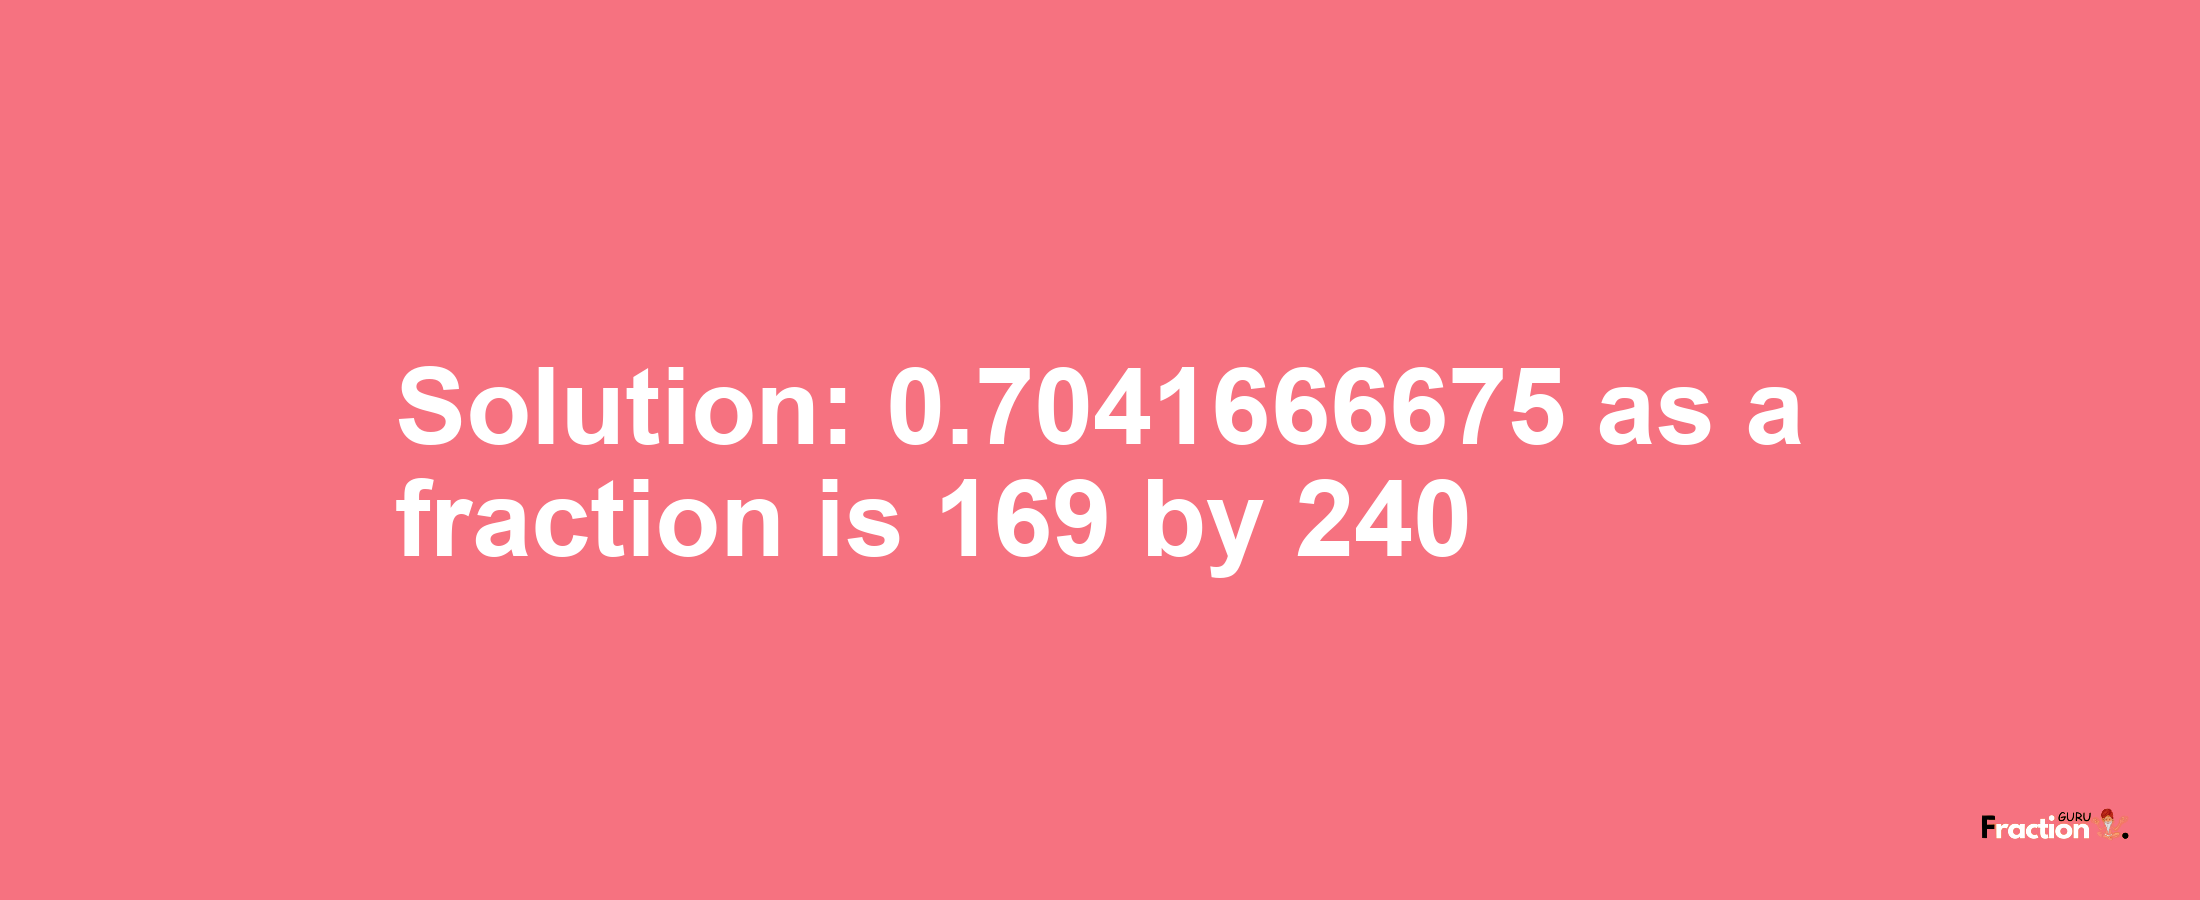 Solution:0.7041666675 as a fraction is 169/240